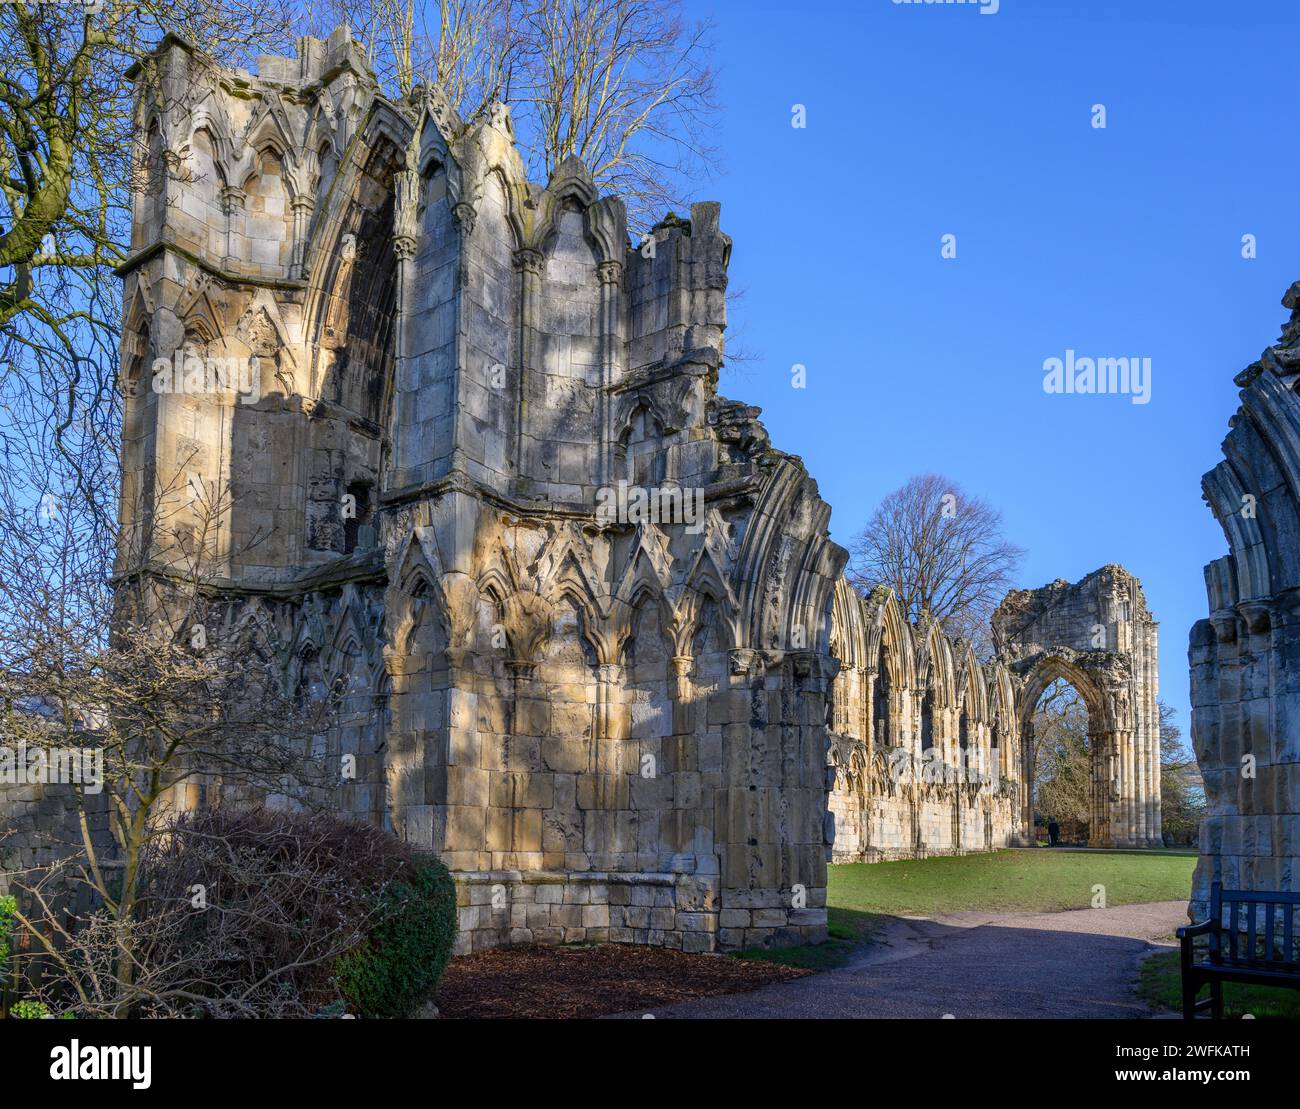 Les ruines de St Mary's Abbey York, Angleterre, Royaume-Uni. Banque D'Images